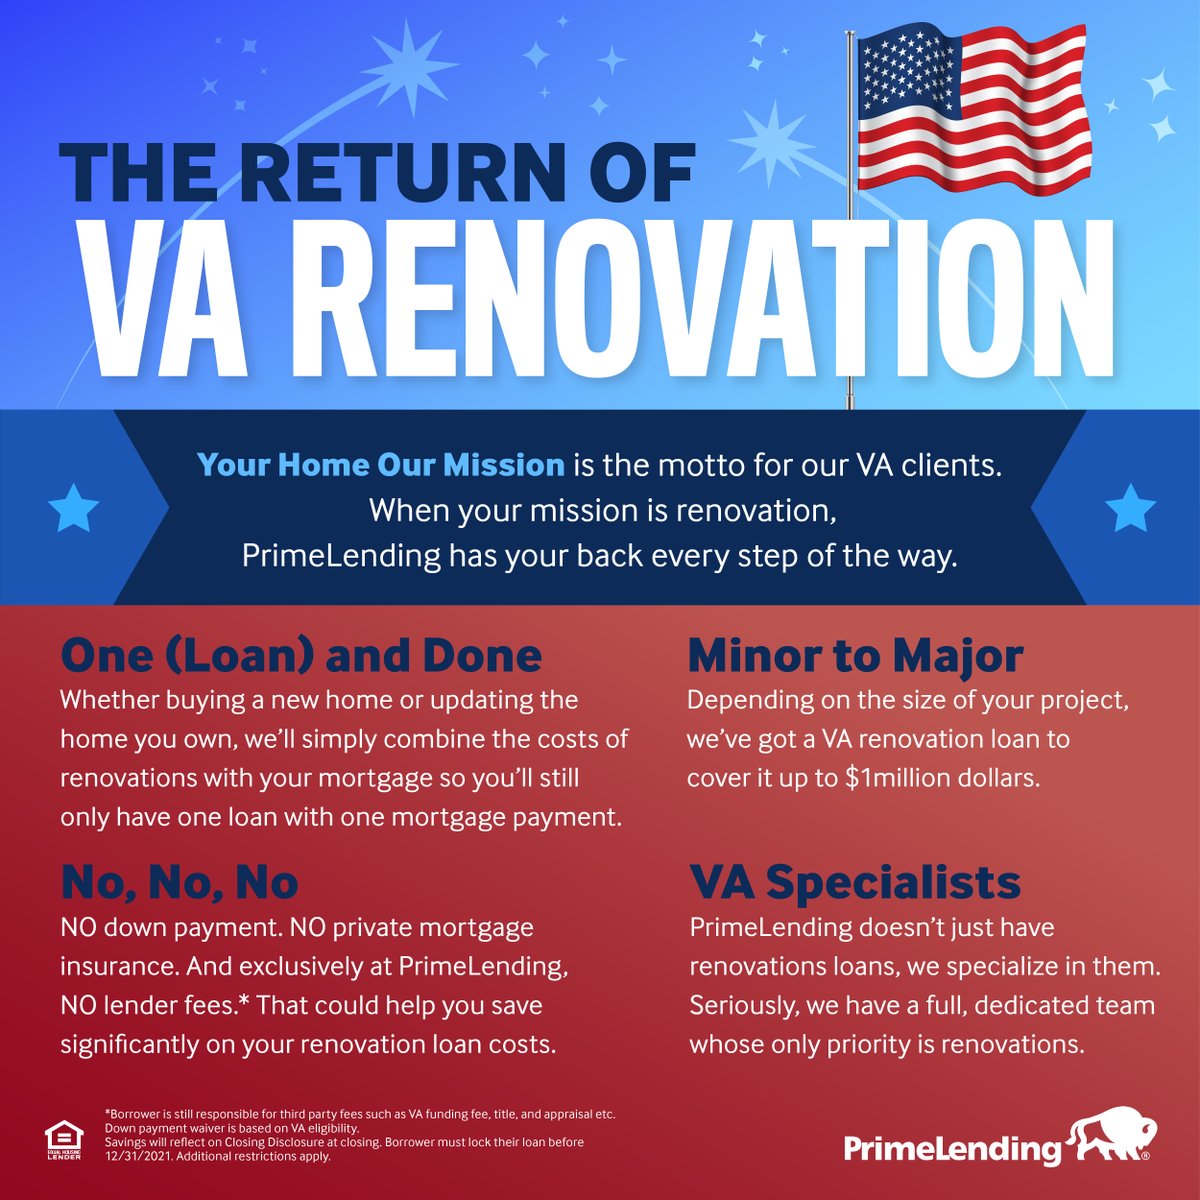 As America’s Renovation Lender, you can feel confident your VA renovation process will be simple and streamlined at every step at PrimeLending. From savings to dream home, your home is our mission. maylendingteam.com